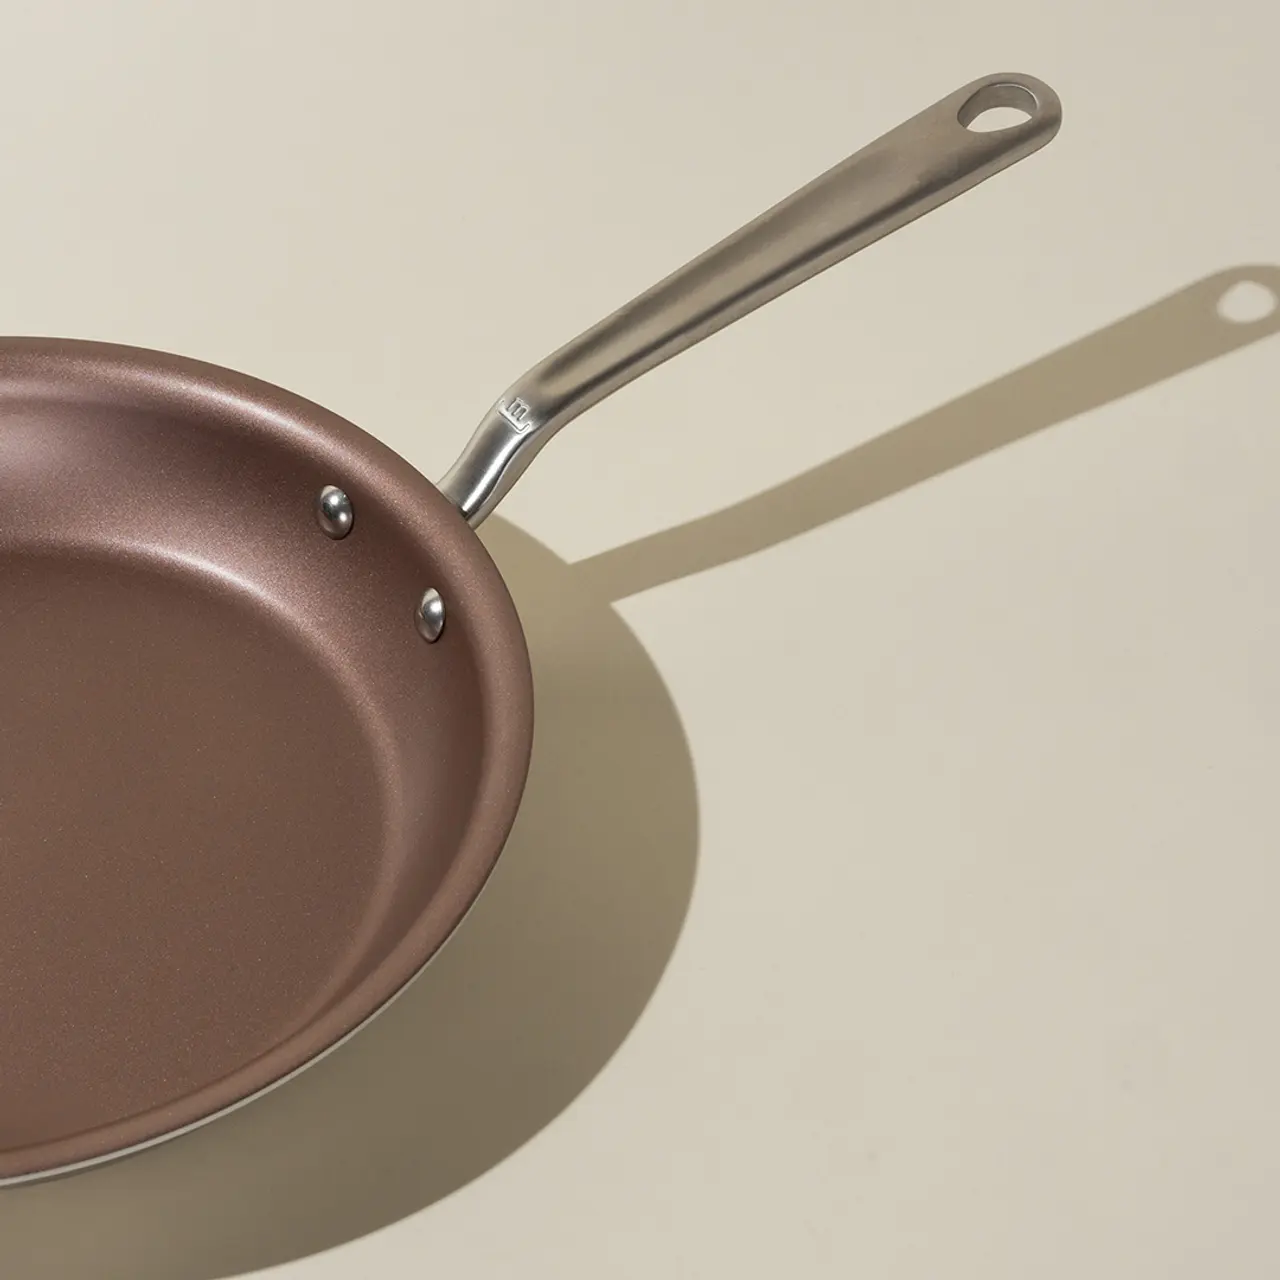 A non-stick frying pan with a stainless steel handle casts a shadow on a light surface.